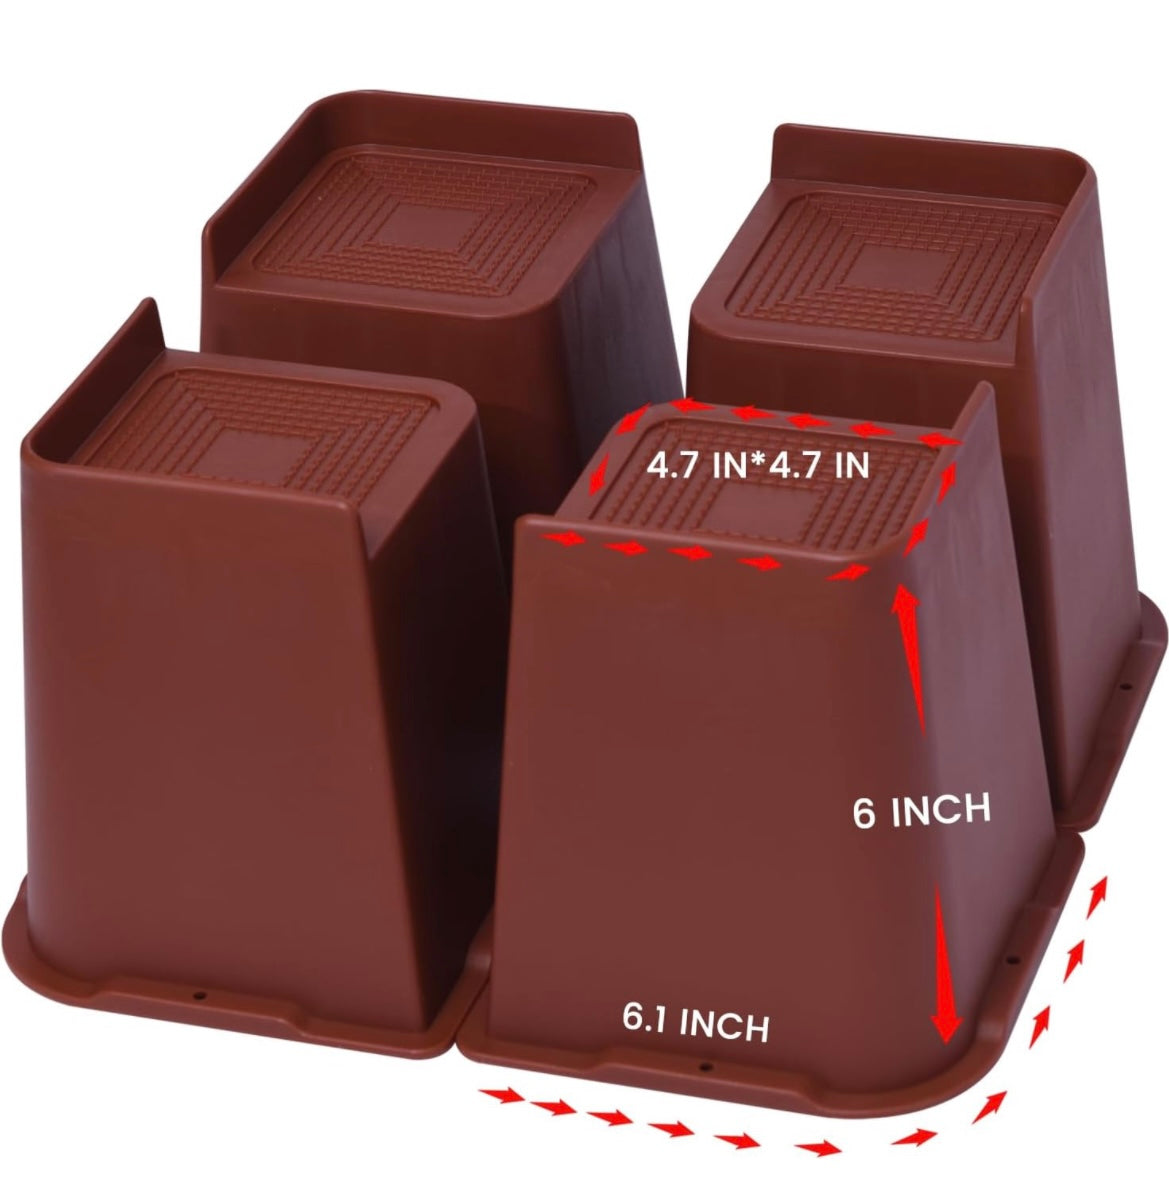 MYMULIKE Bed Risers 4 inch,6 inch, 8 inch, Oversized Furniture Risers, Support Up to 6000 Lbs, Lift 4 inch for Couch, Sofa, Table,Chair (Brown 4 Pack, 6 inch)